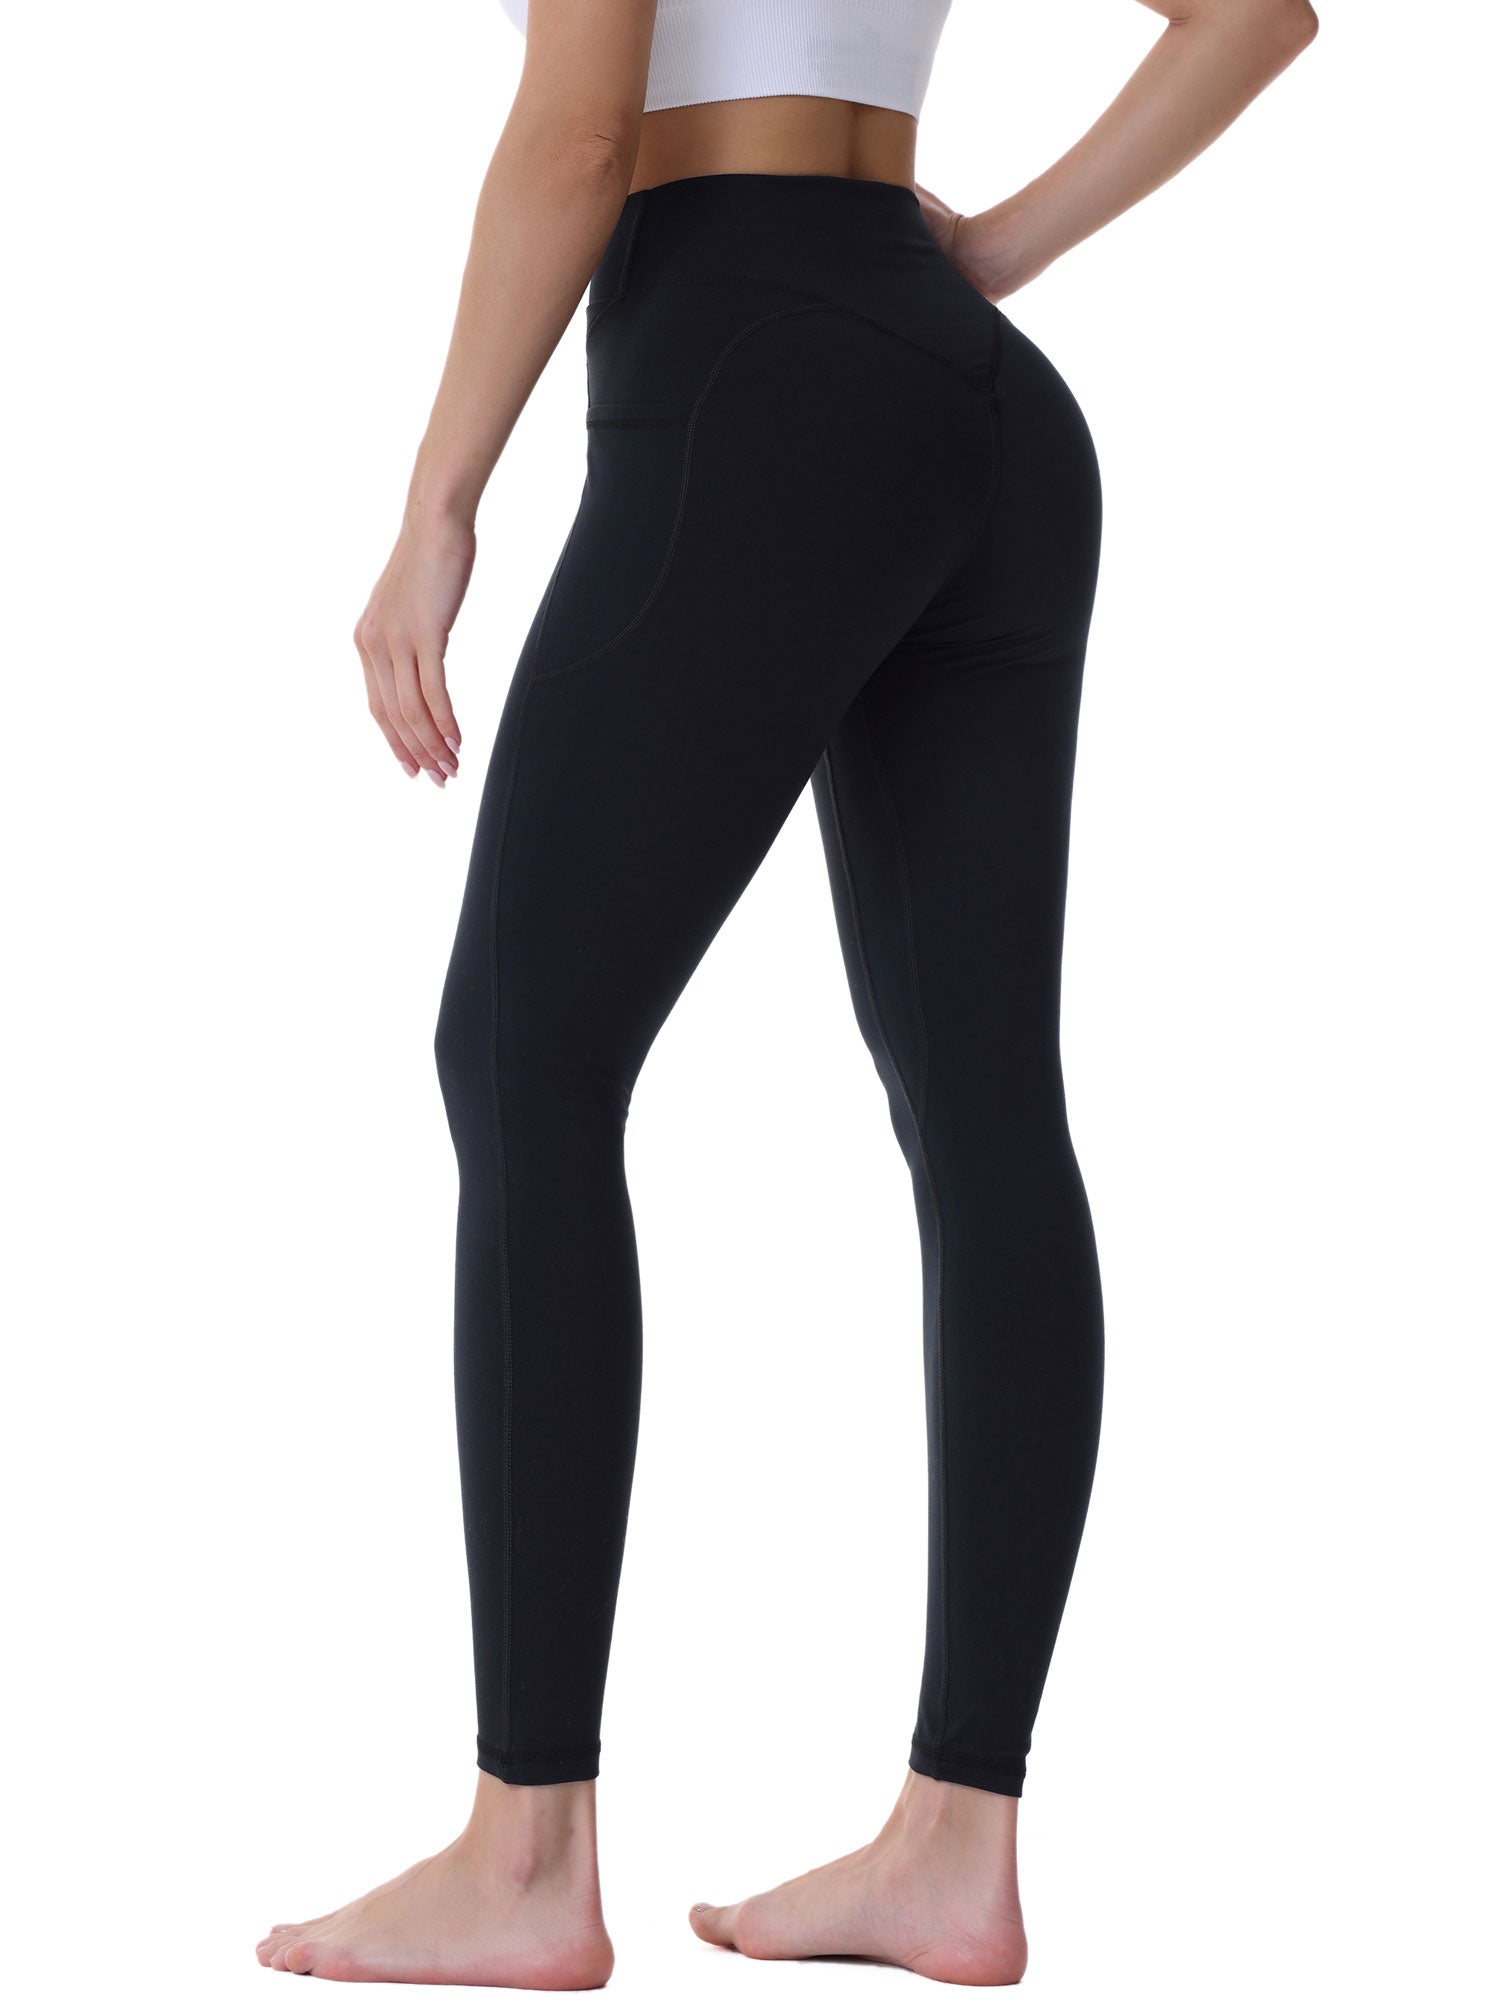 Sunzel Women's Workout Leggings with Pockets, High Waisted Tummy